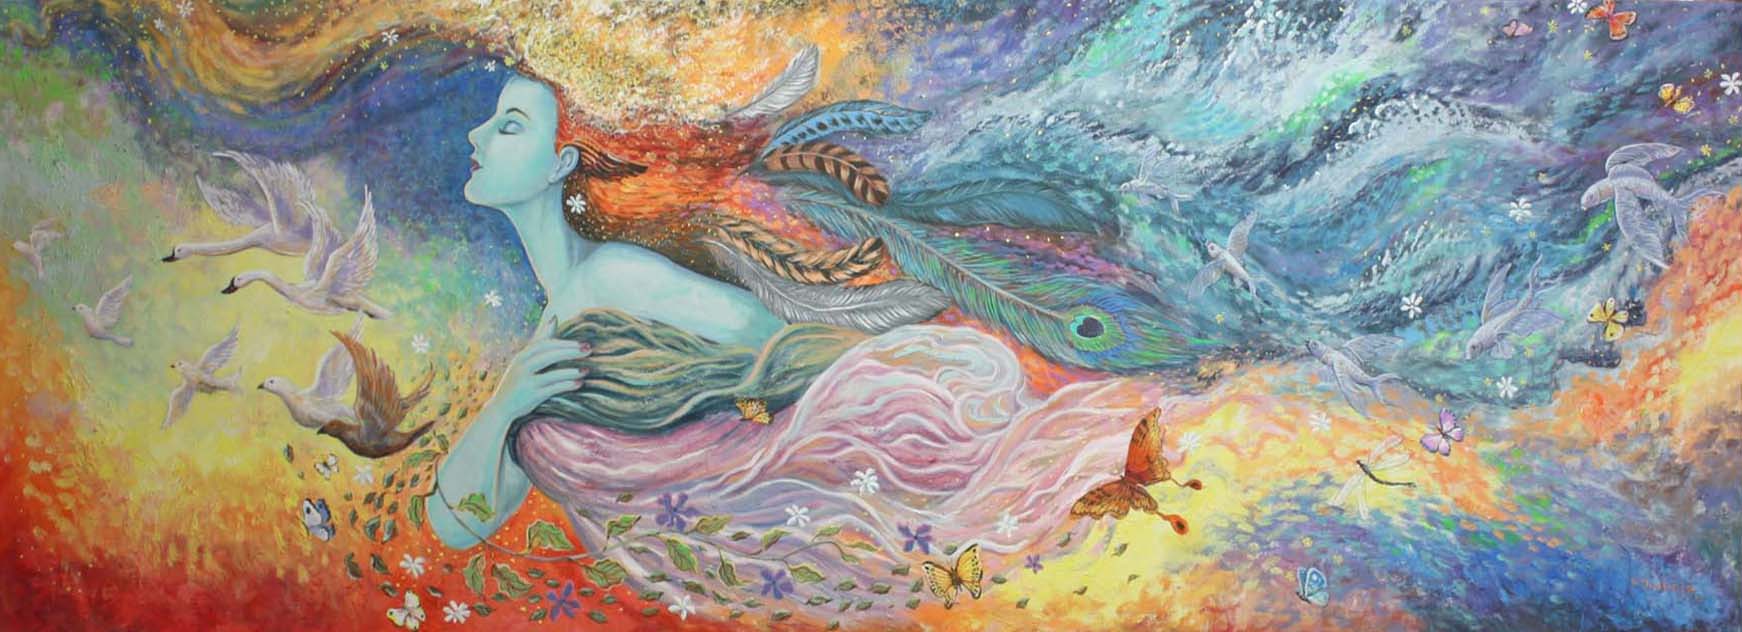 Decorative surreal mural painting - lady with draperies, adored with birds, ducks, colorful feathers, butterflies, flying fish, blue skies and turquoise sea wave waters.